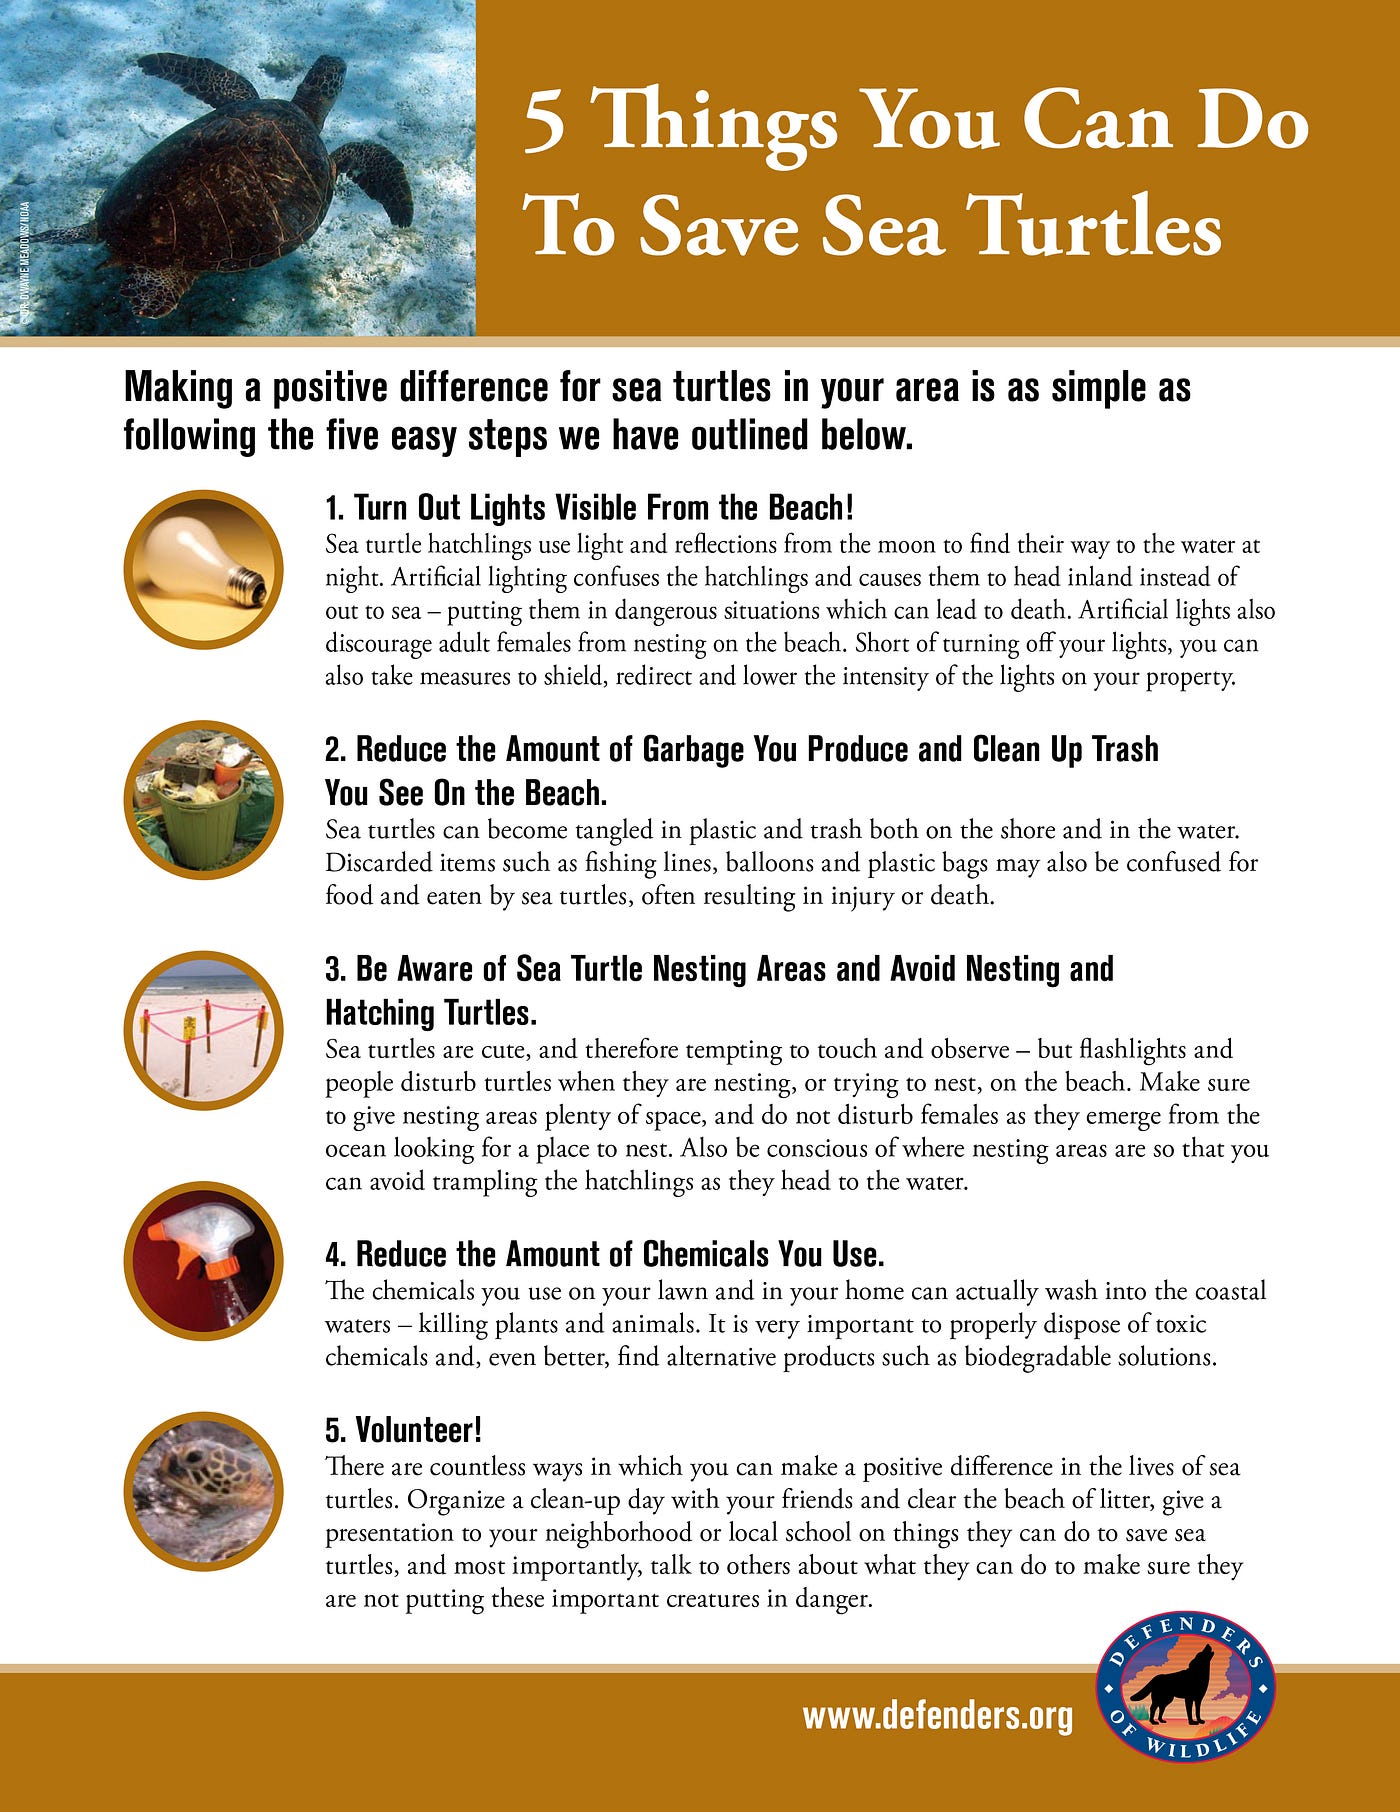 World Turtle Day: 5 ways to help the turtles in your life